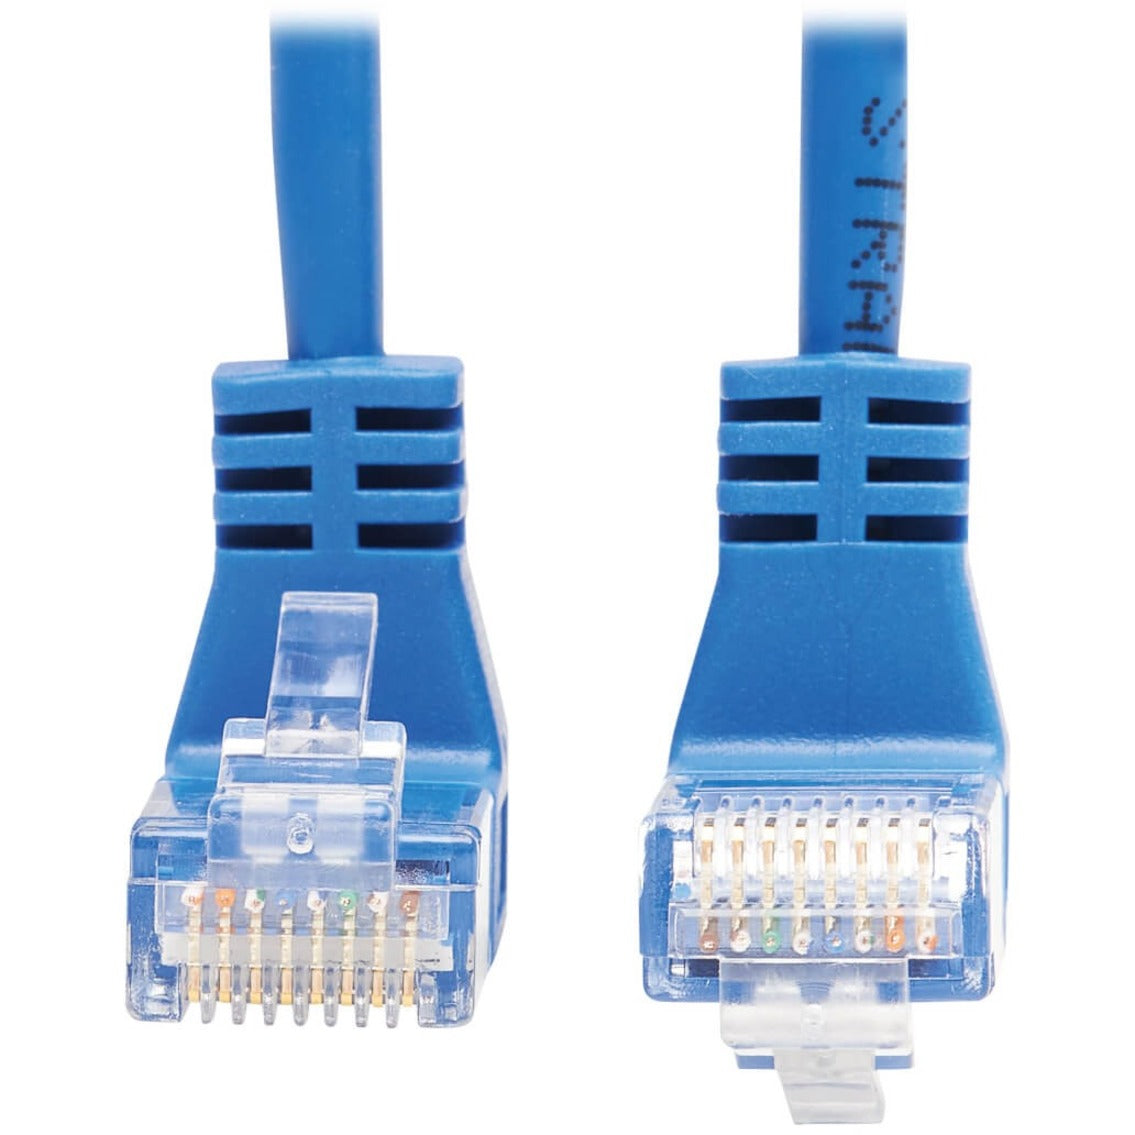 Tripp Lite N204-S01-BL-UD Cat.6 UTP Patch Network Cable, 1 ft, Molded, Down-angled Connector, 90° Angled Connector, Up-angled Connector, Bend Resistant, Stress Resistant